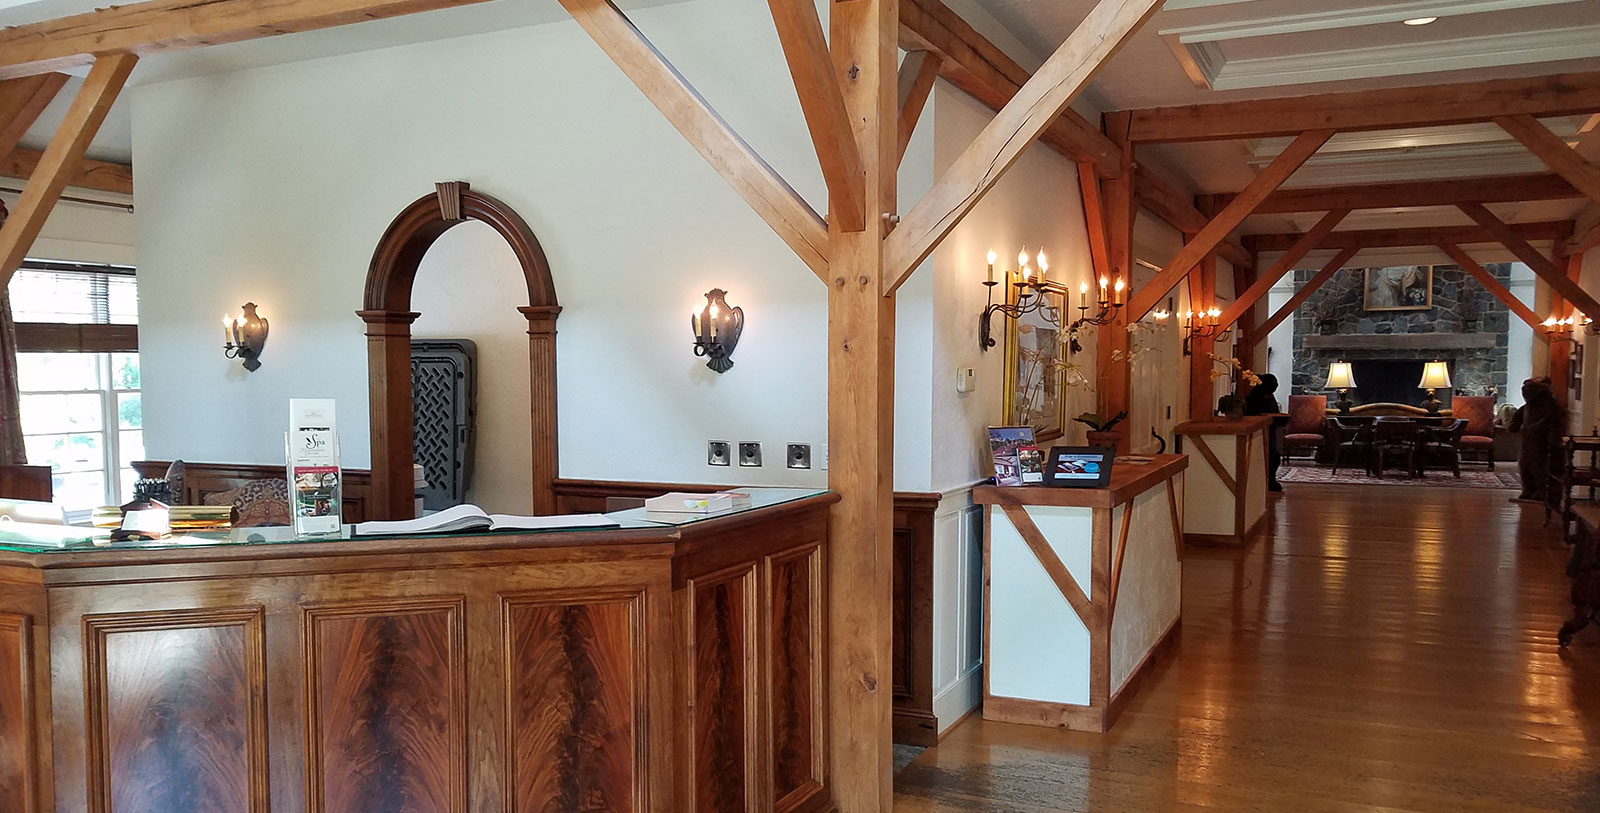 Discover the great historical character of the Inn at Montchanin Village.